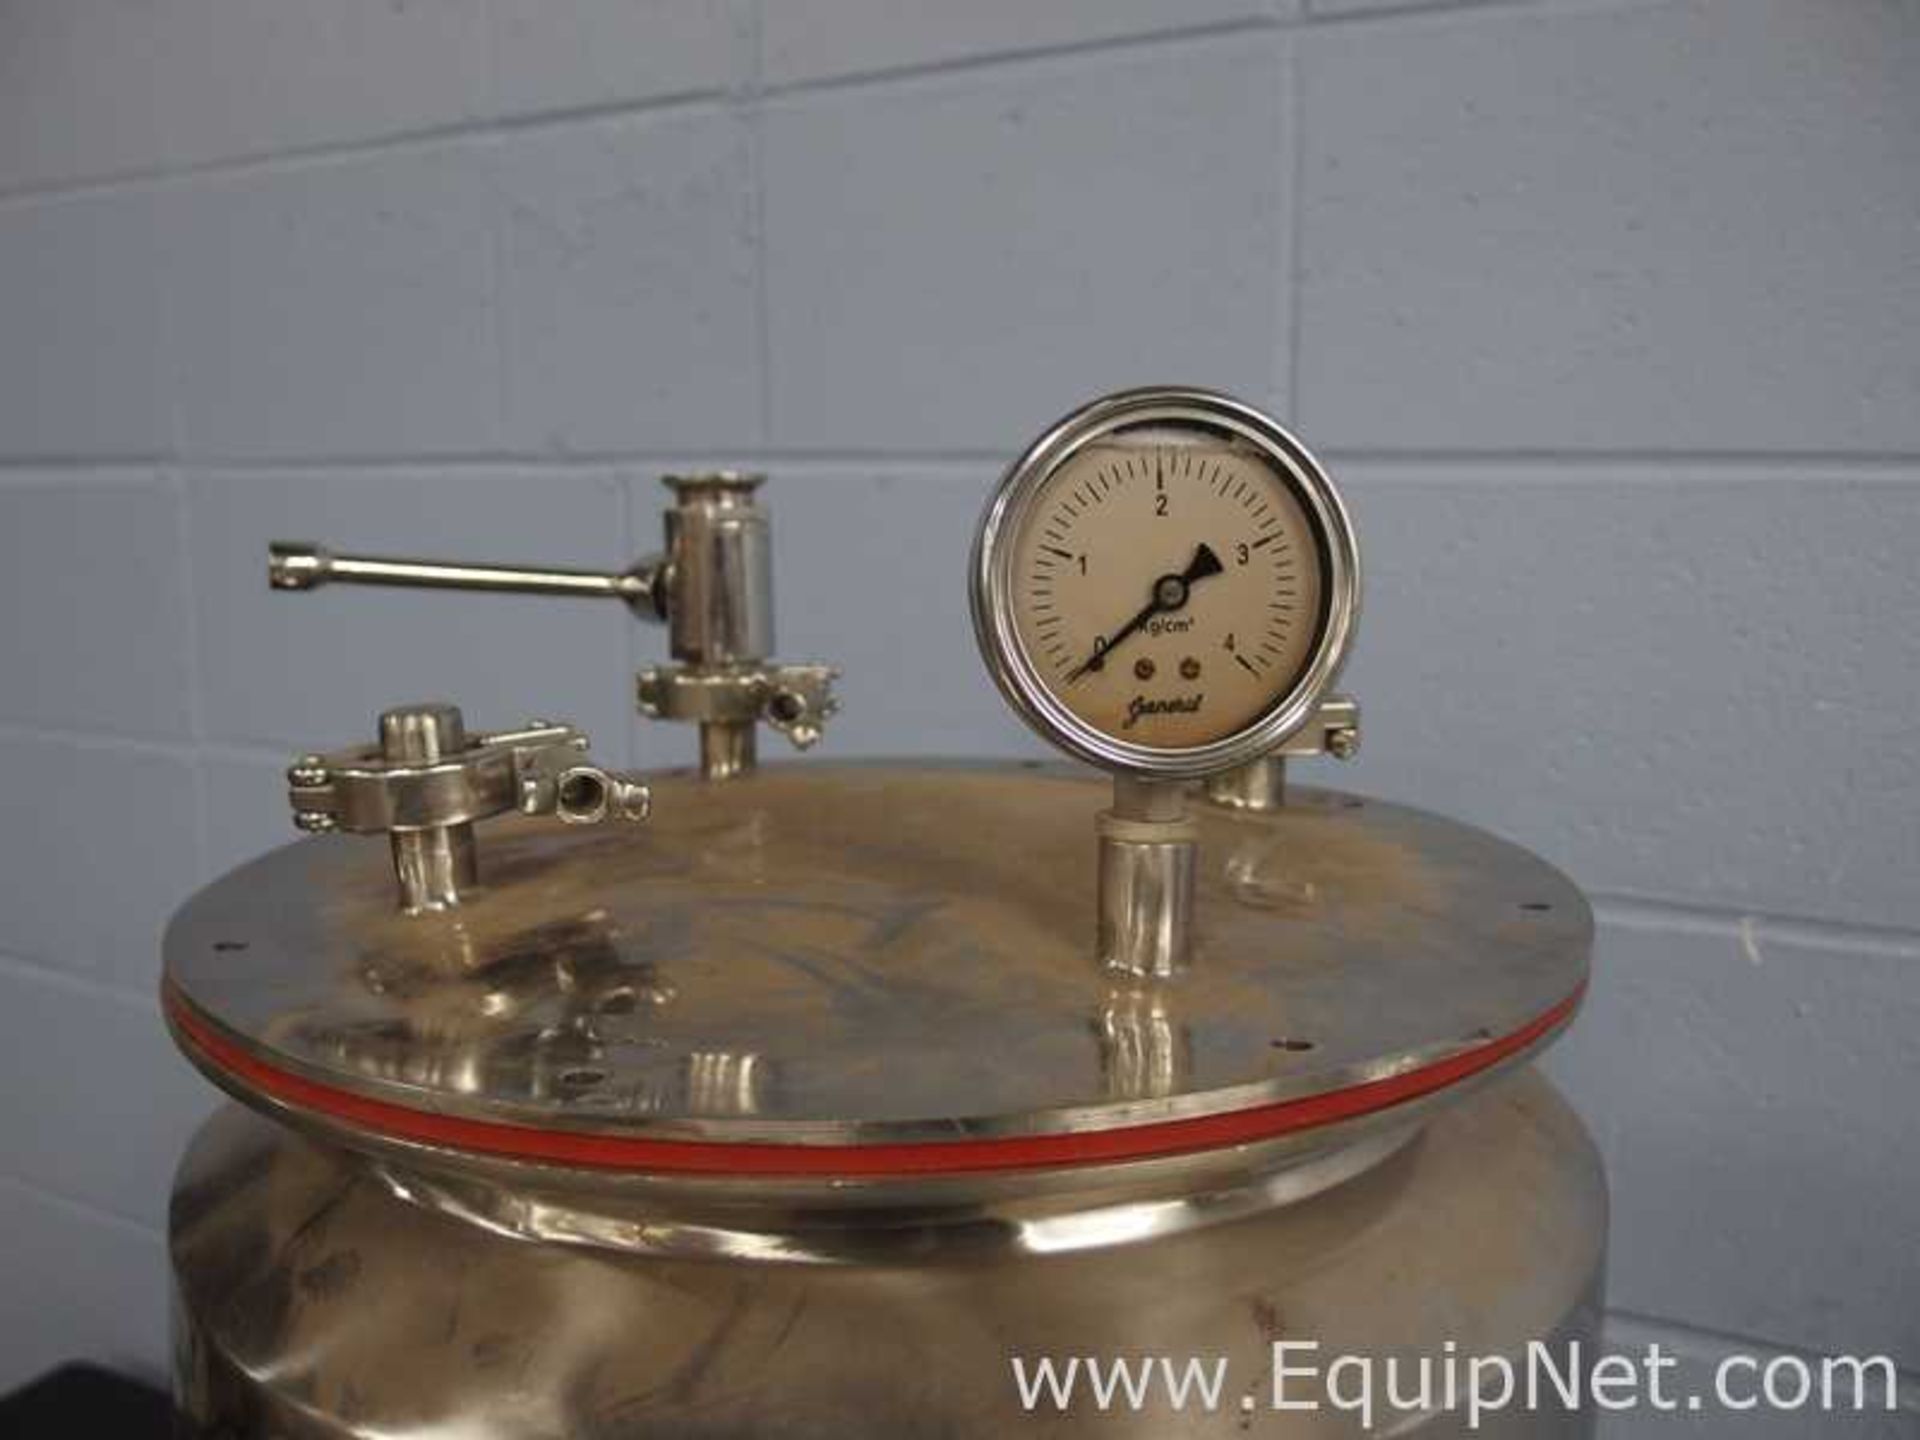 Approximately 10 Gallon Stainless Steel Vessel - Image 3 of 6